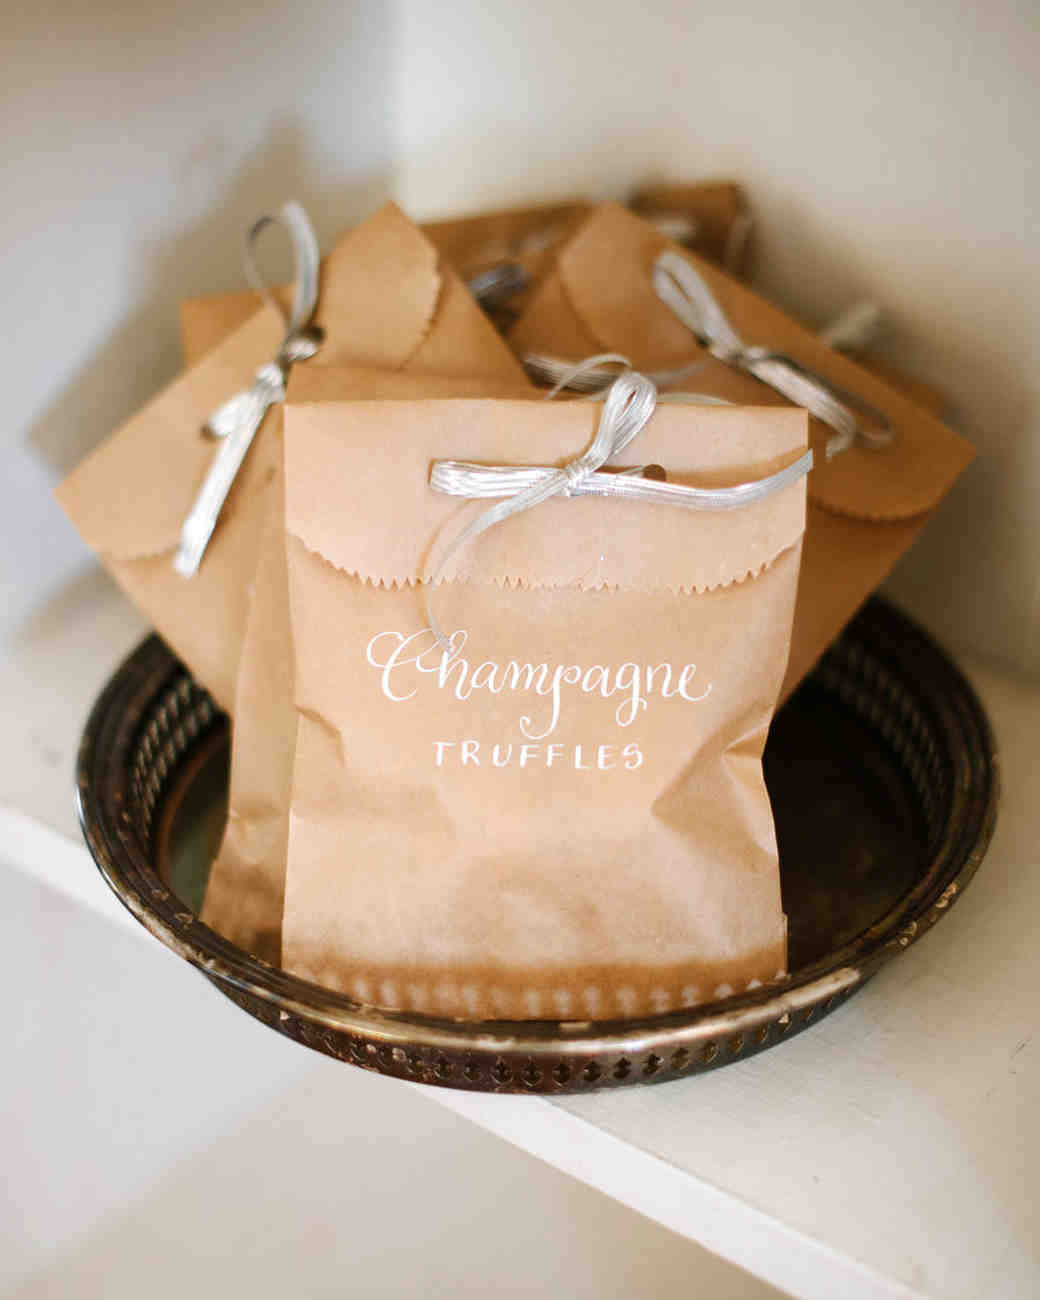 Ideas For Engagement Party Favors
 How to Plan the Ultimate Engagement Party